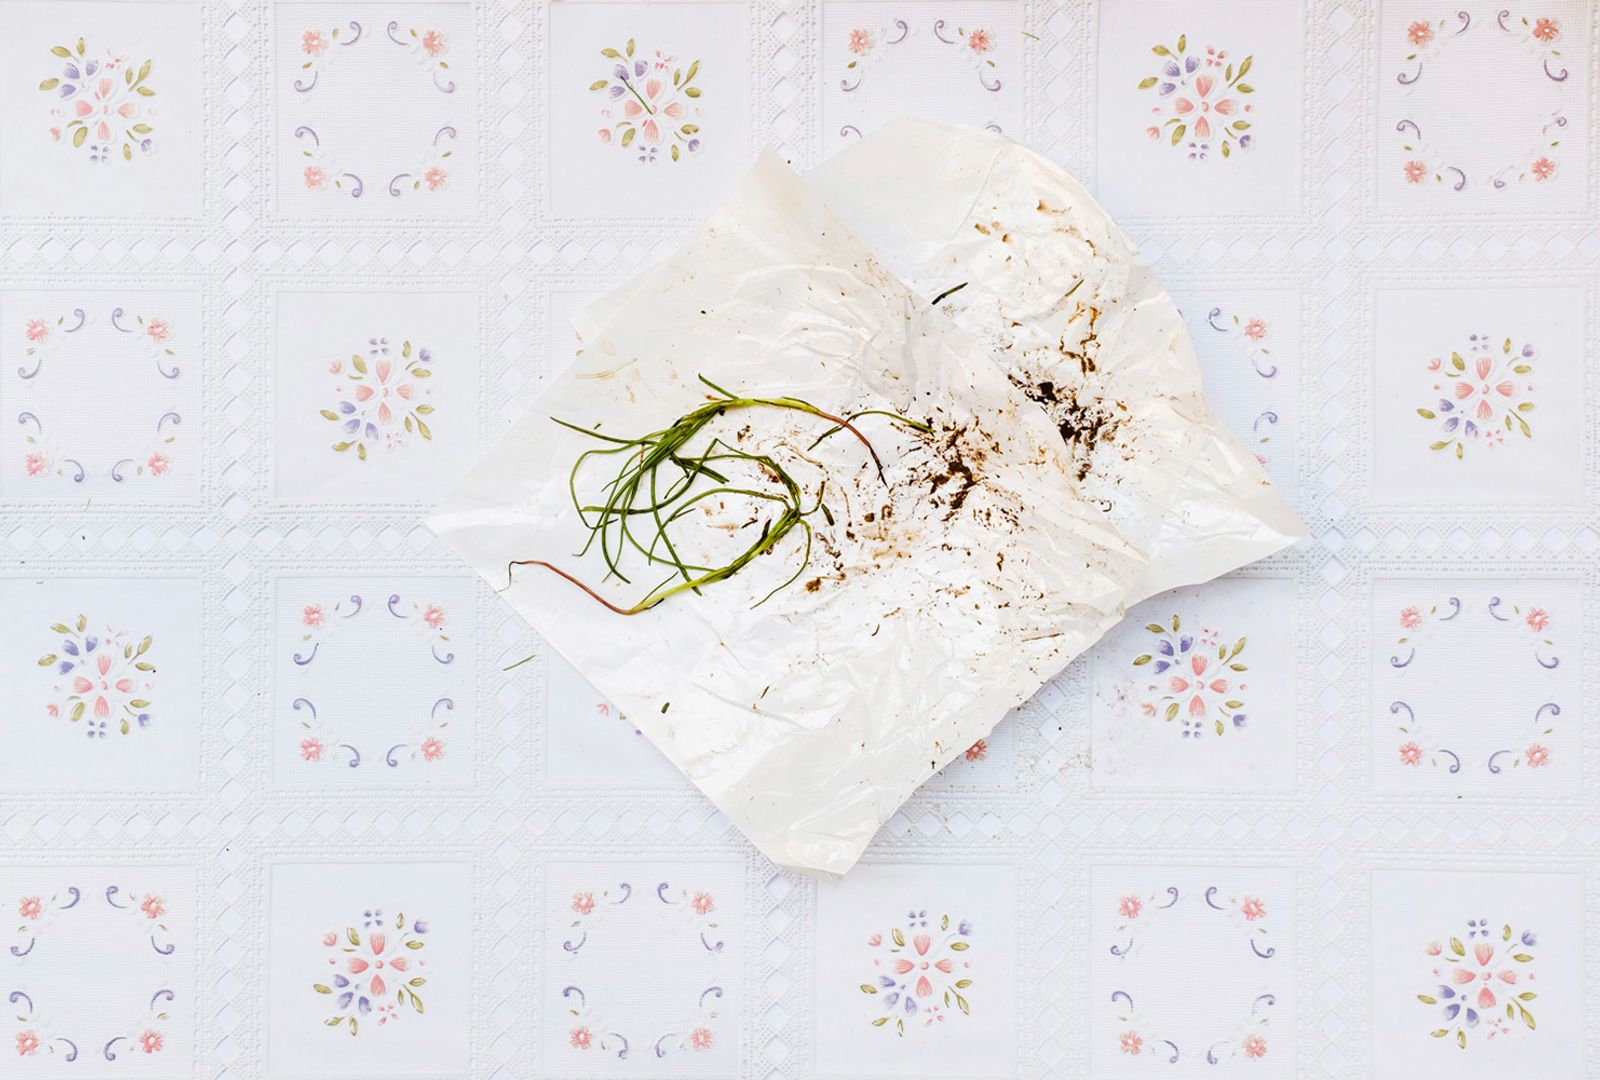 © Barbara Modolo - Image from the Toxo menu photography project